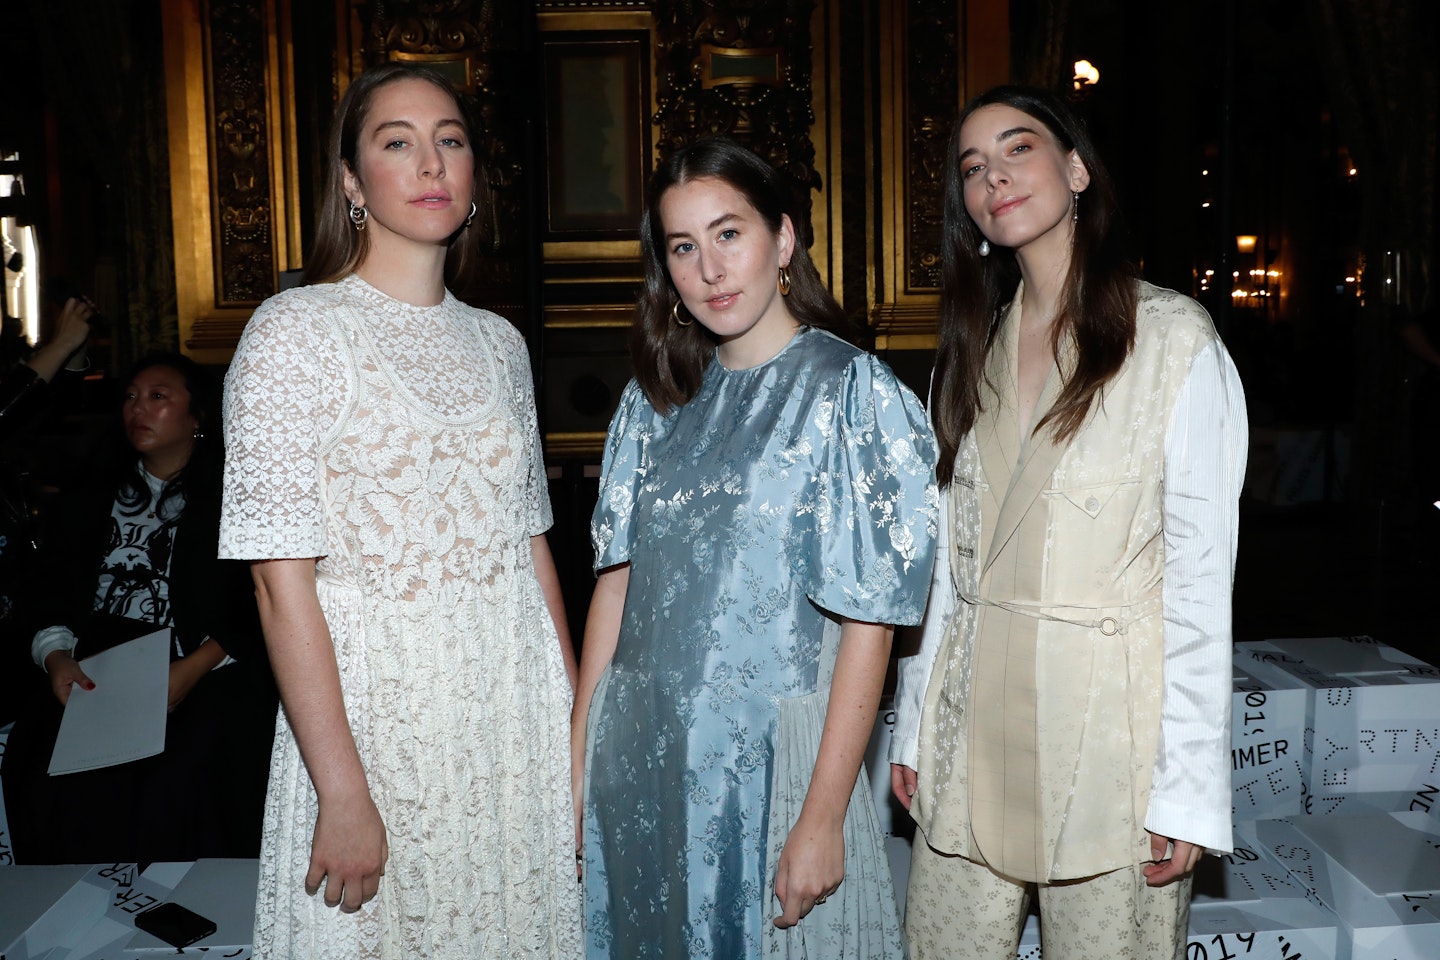 Este Haim Wants People To Stop Commenting On Her ‘Bass Face’